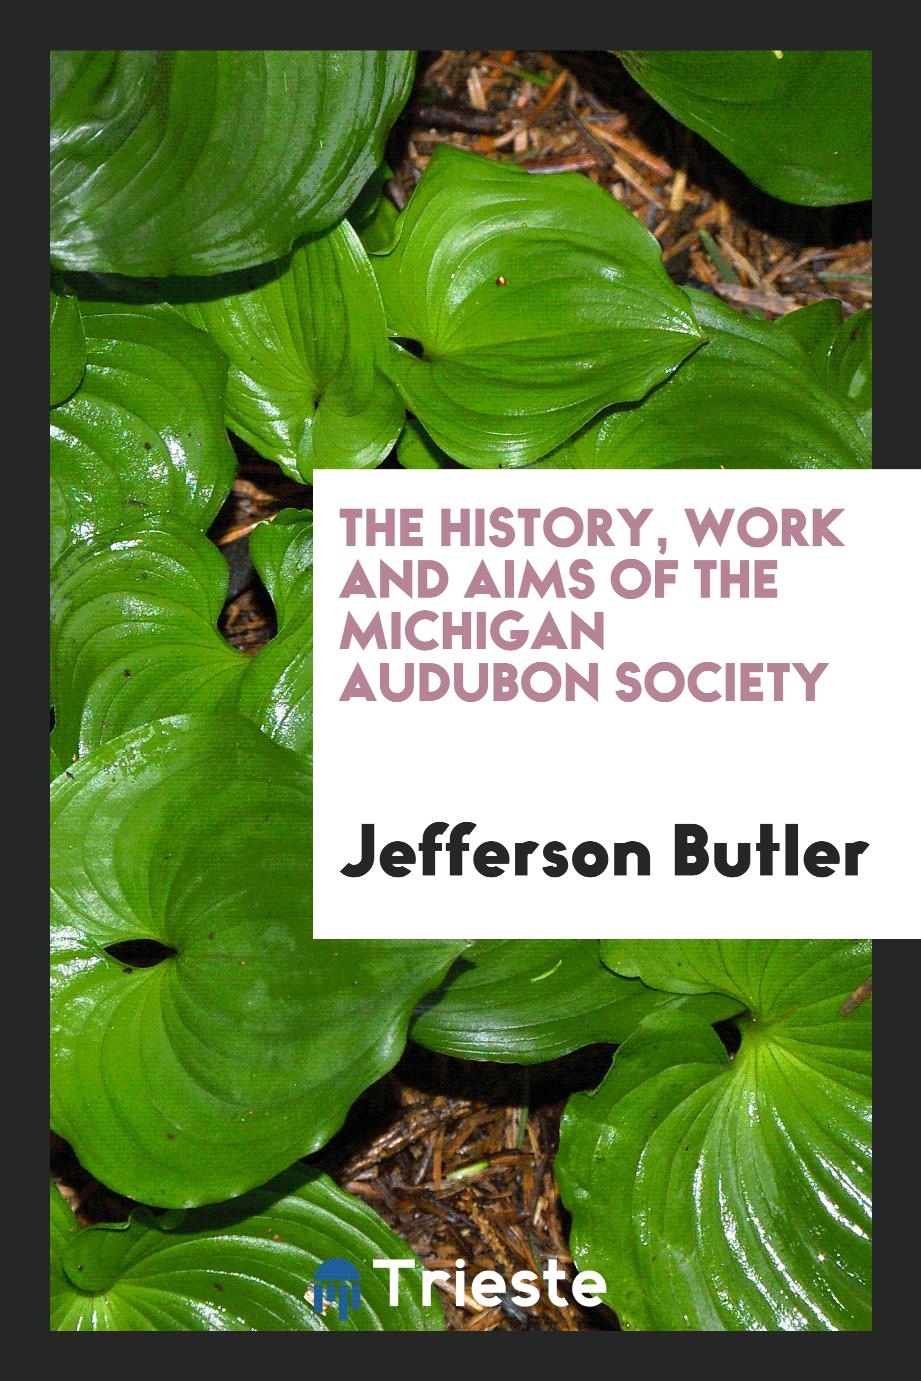 The History, Work and Aims of the Michigan Audubon Society